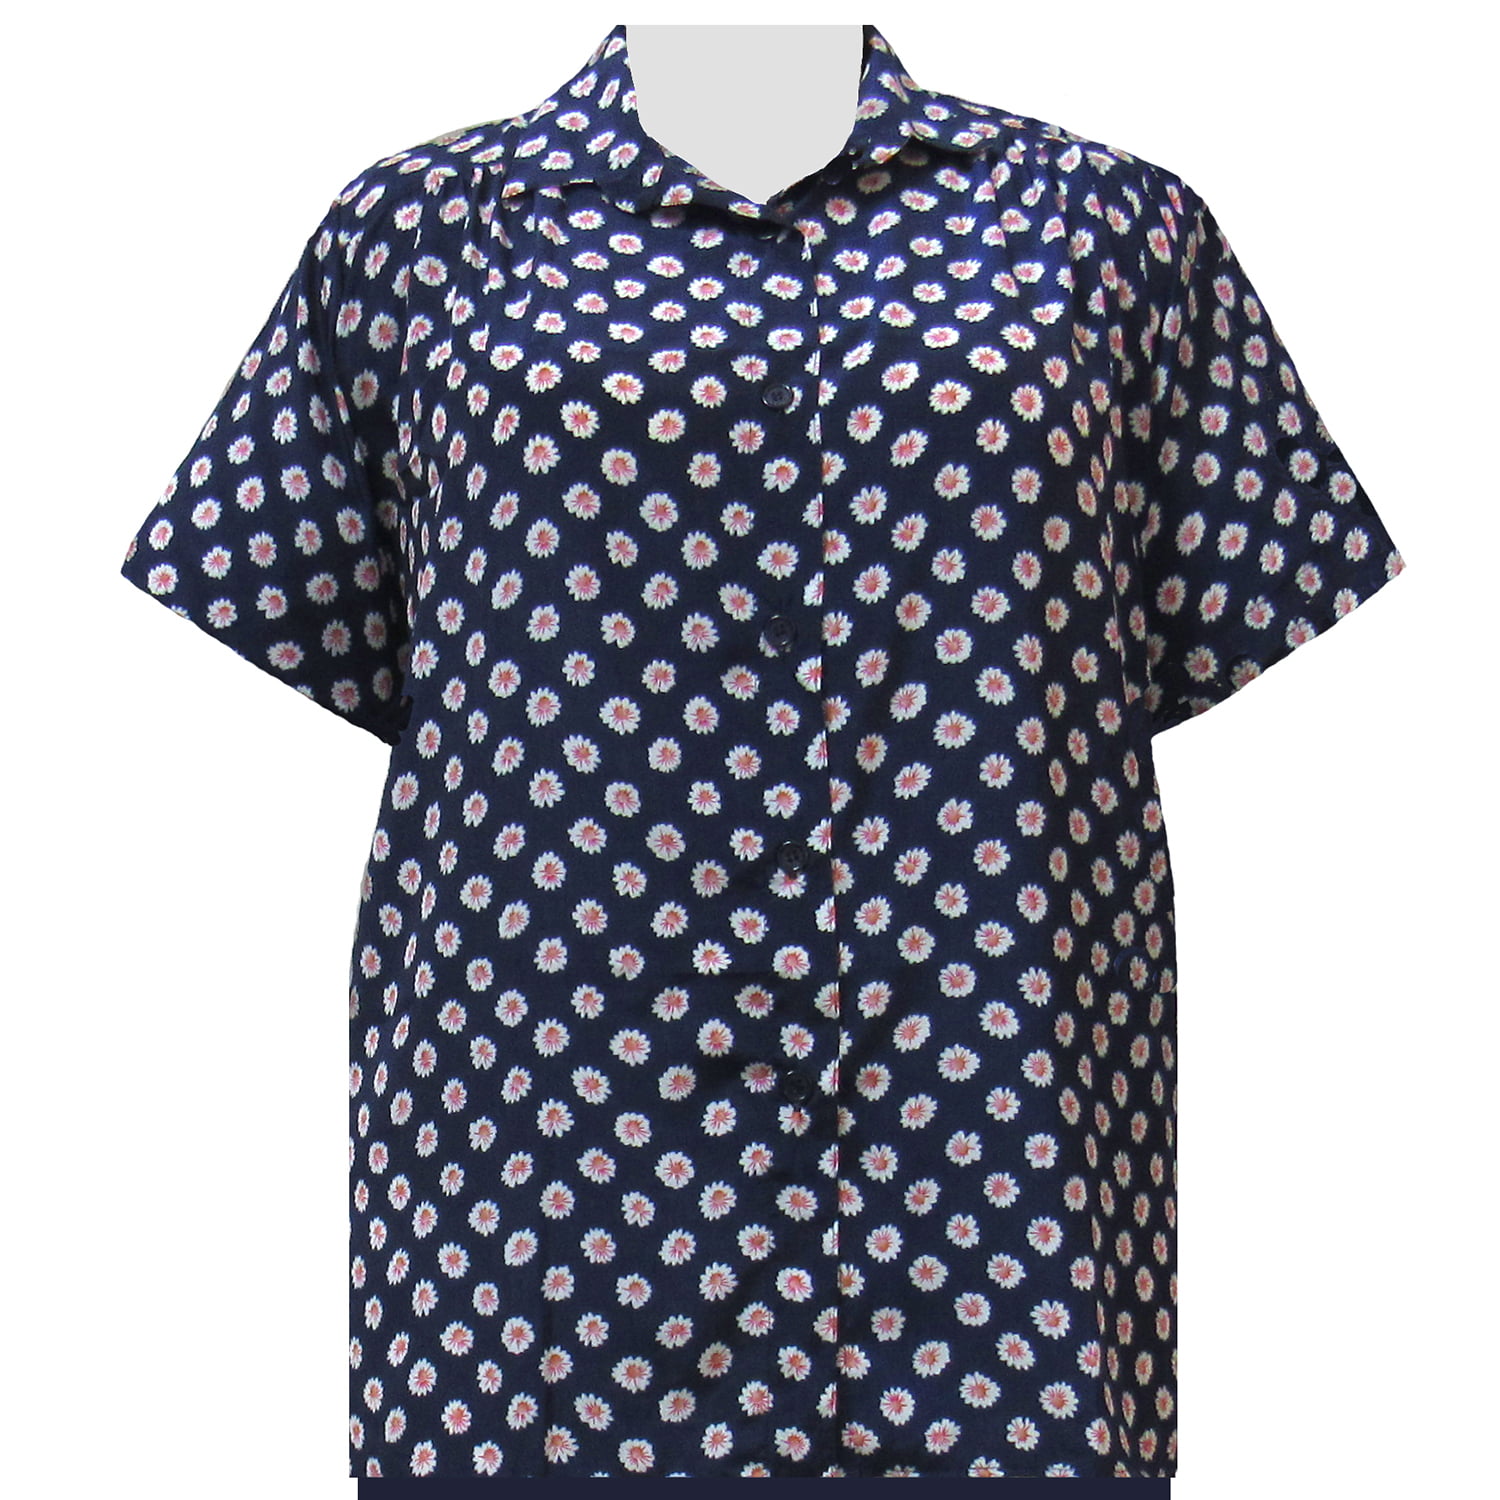 A Personal Touch Women's Plus Size Short Sleeve Button-Up Print Blouse ...